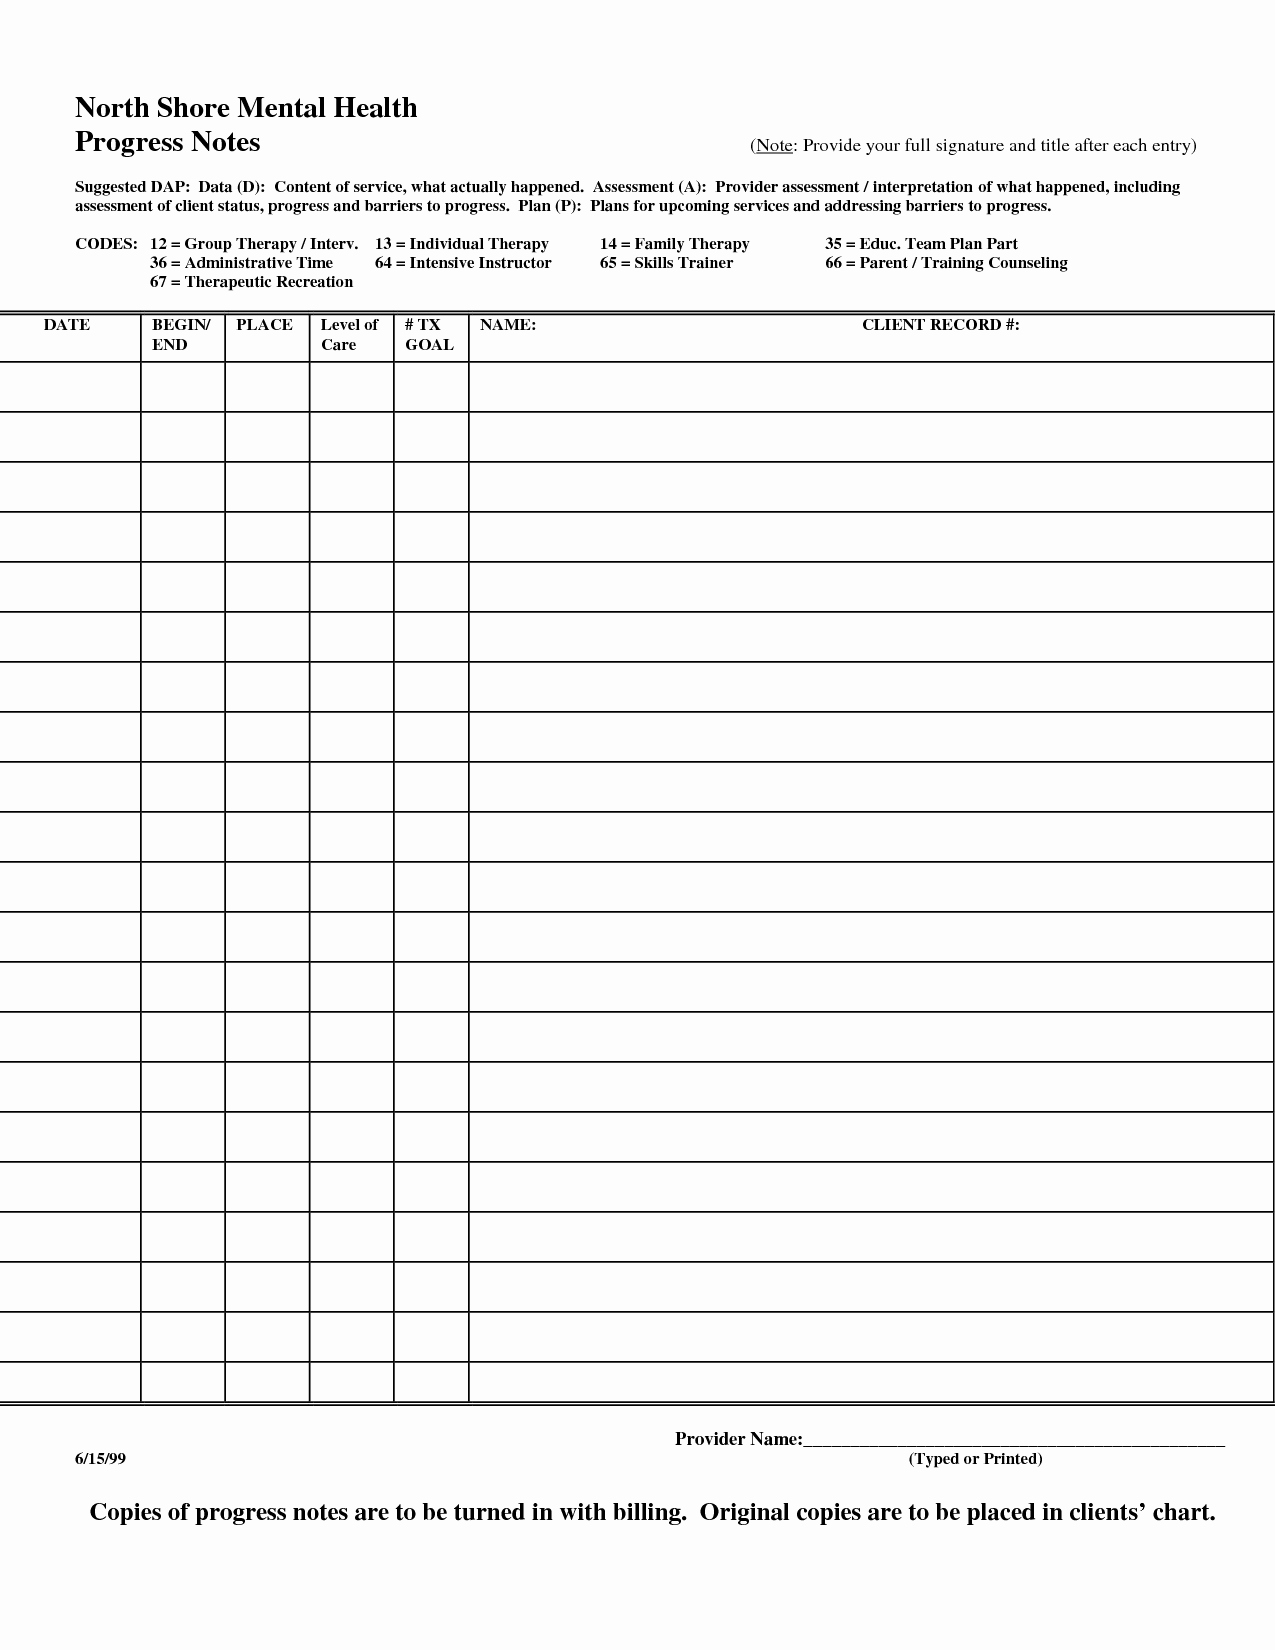 Case Note Template social Work New Progress Note Template